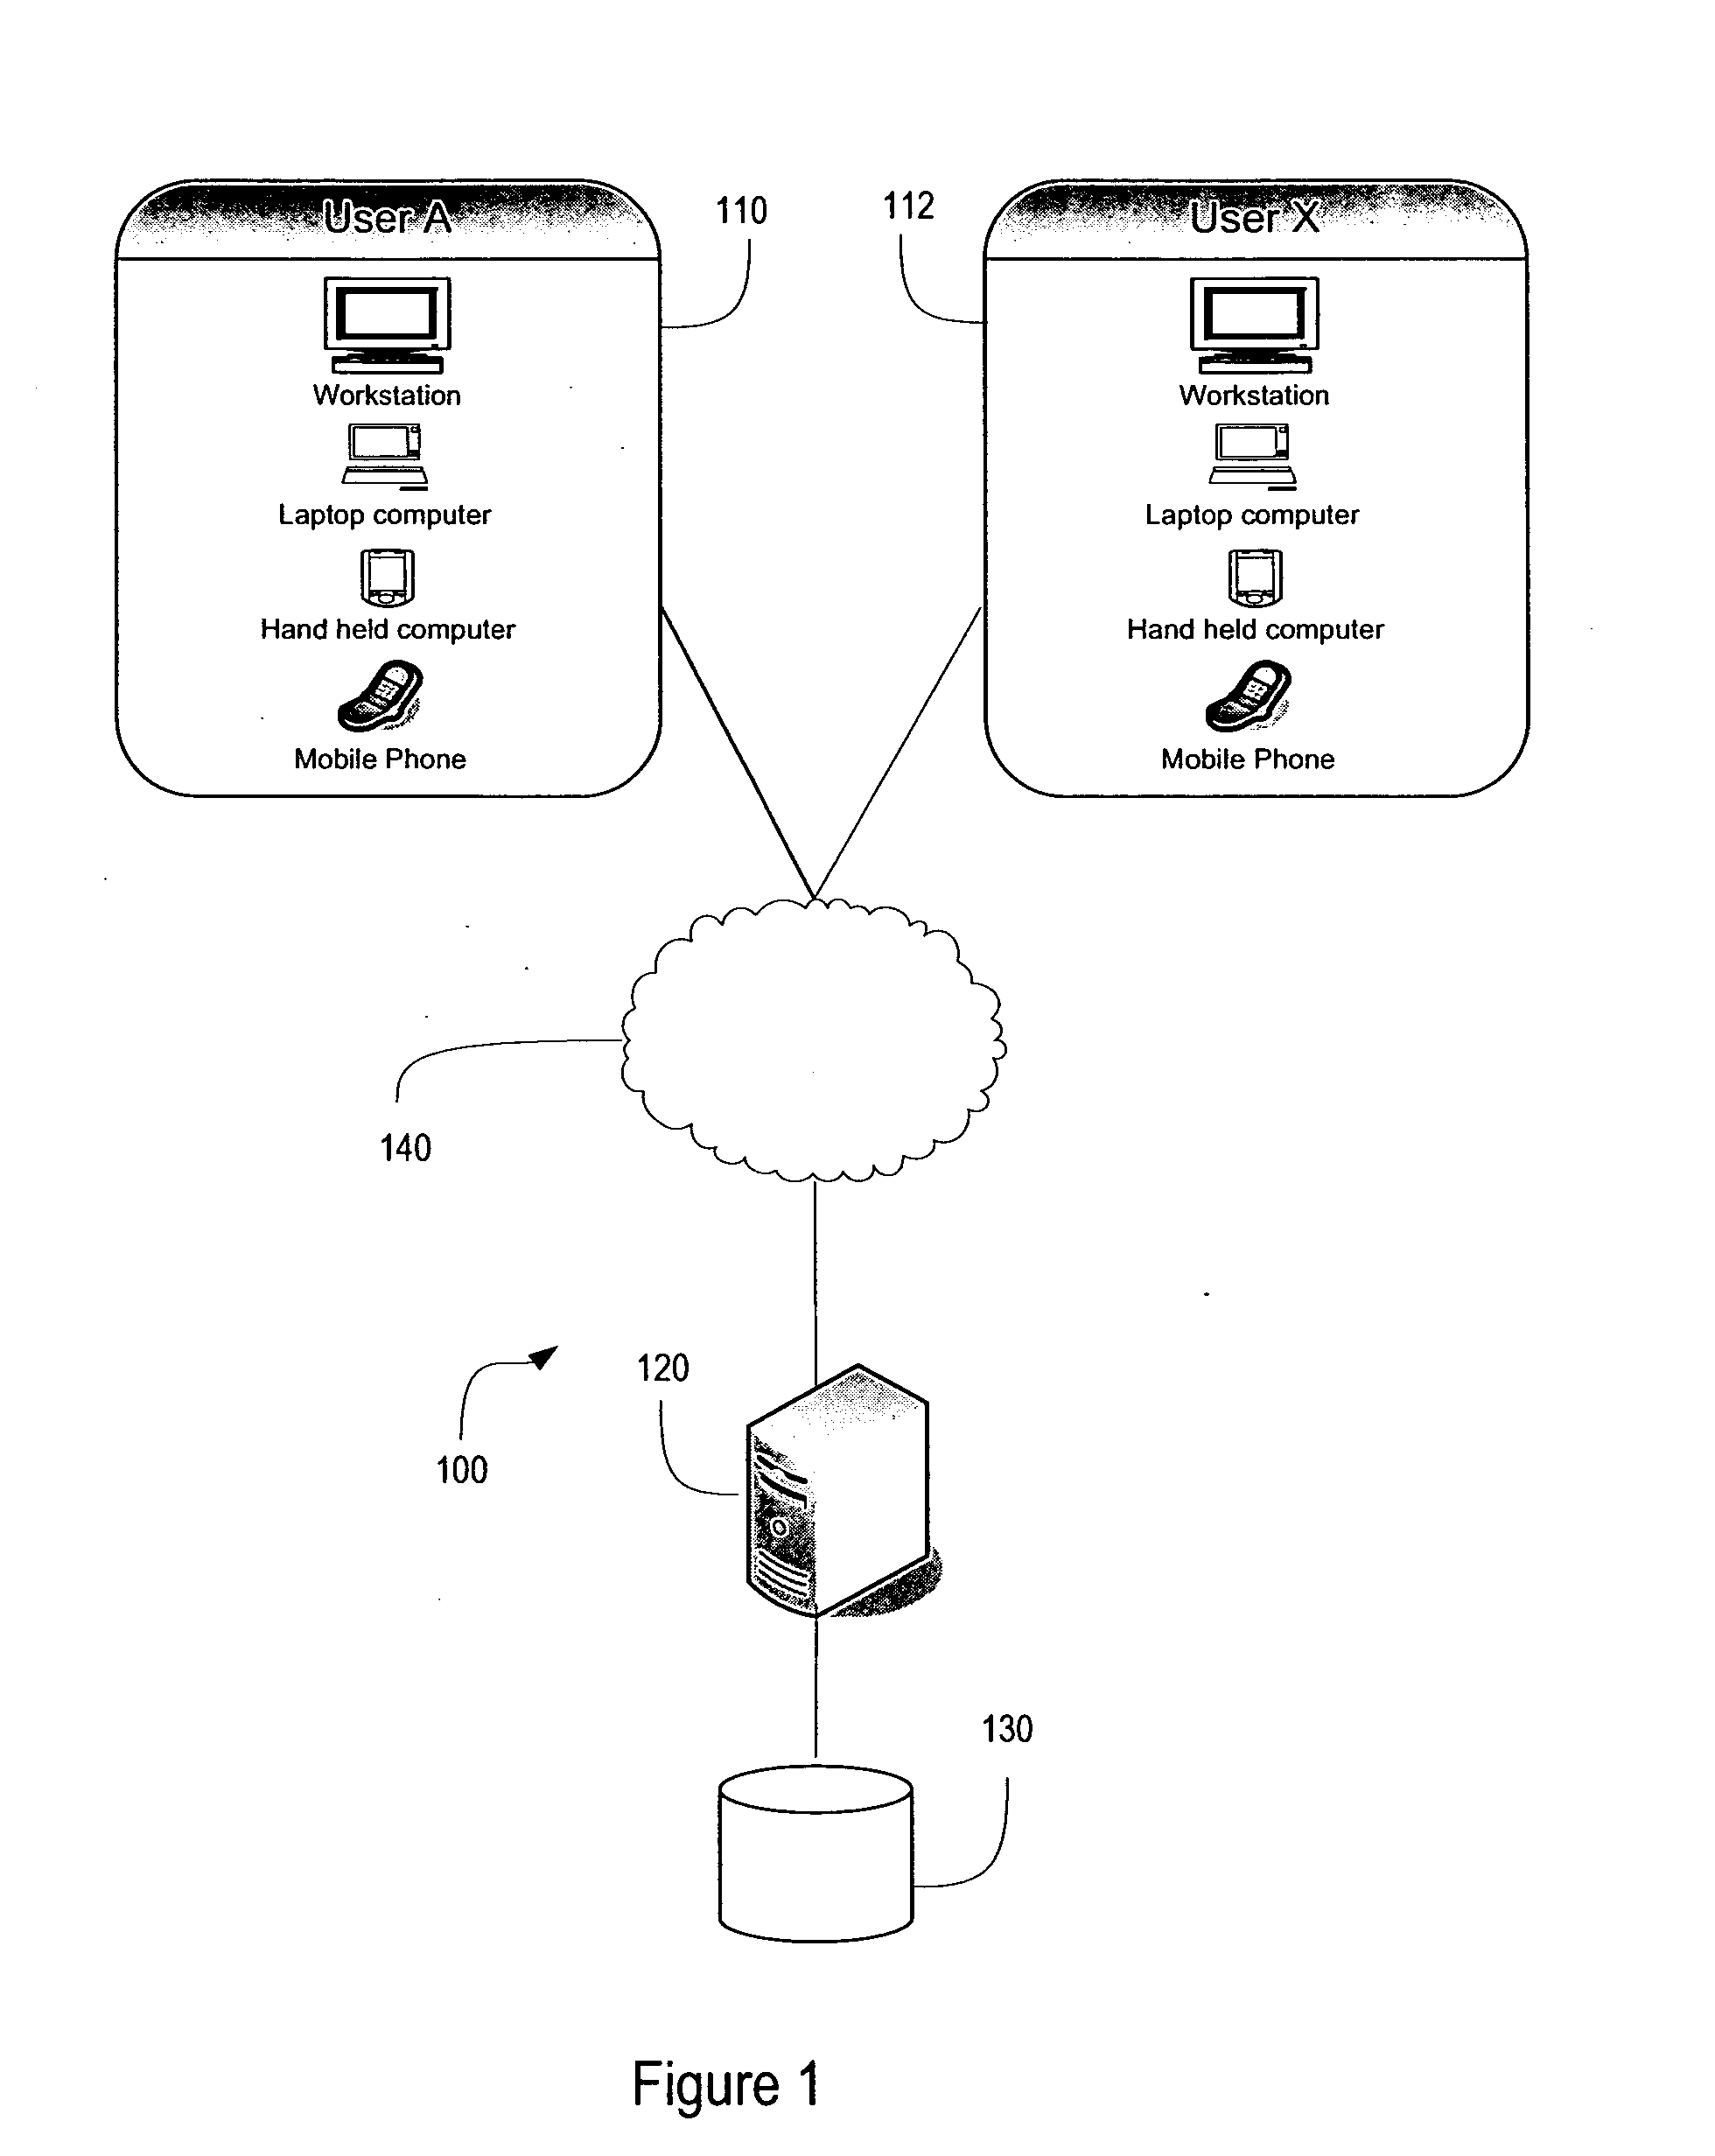 System for creating media objects including advertisements